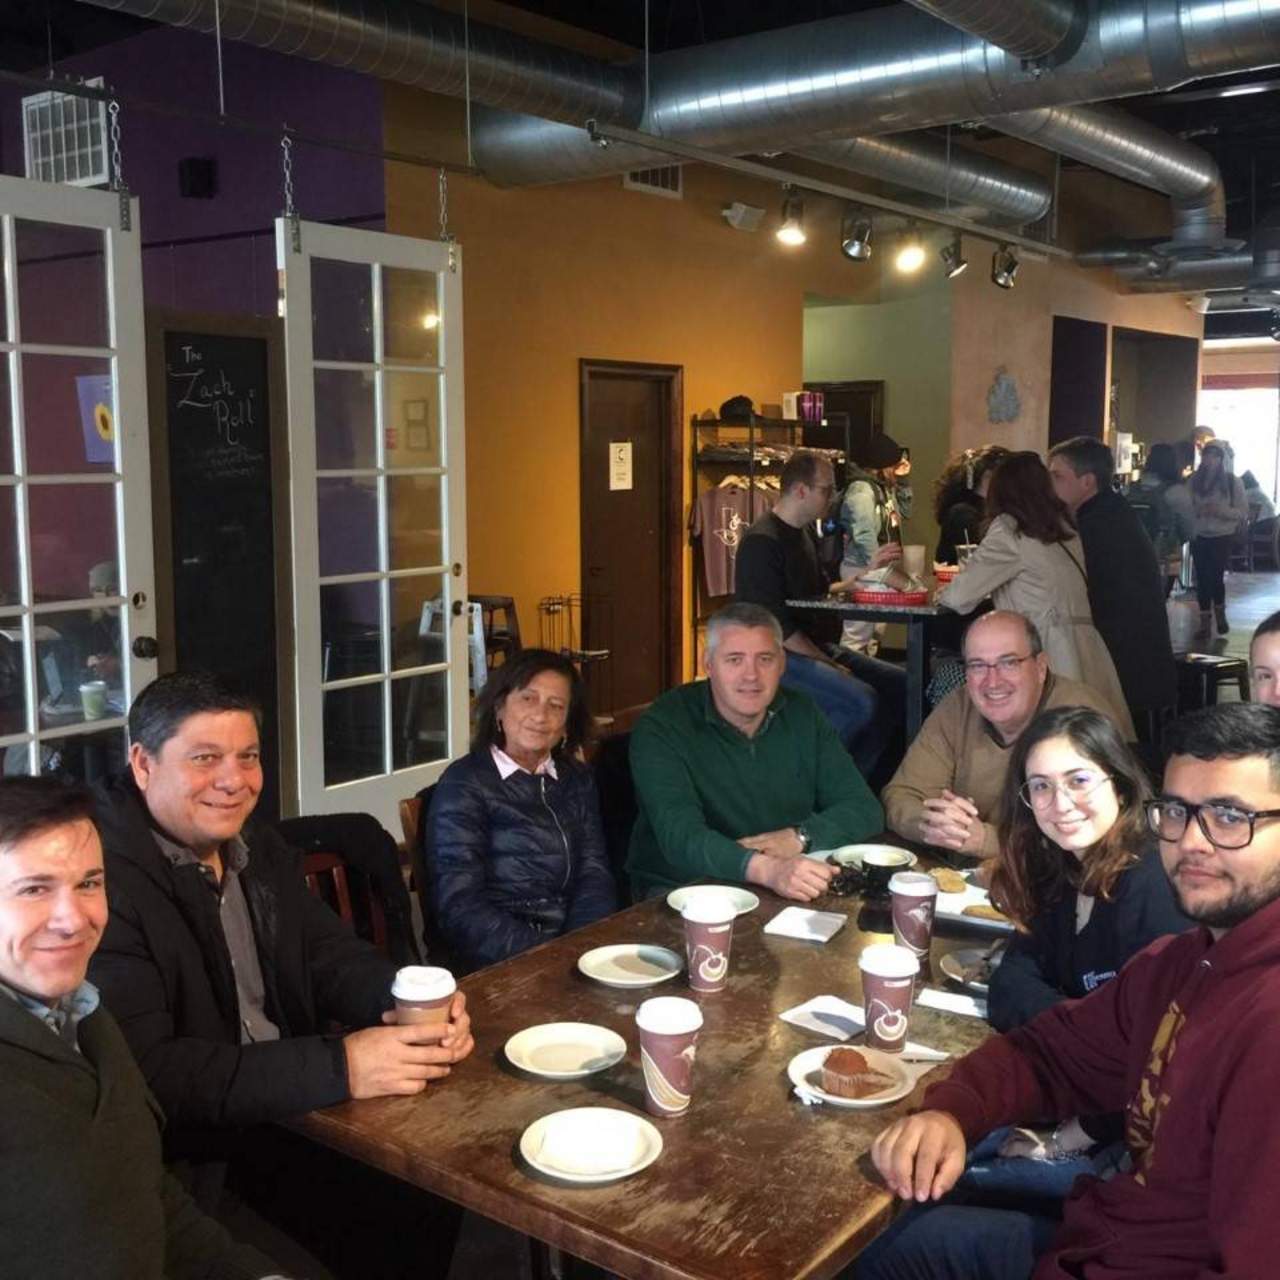 Students and members of Spanish delegation sitting at a table in a coffee shop, taken from a different angle